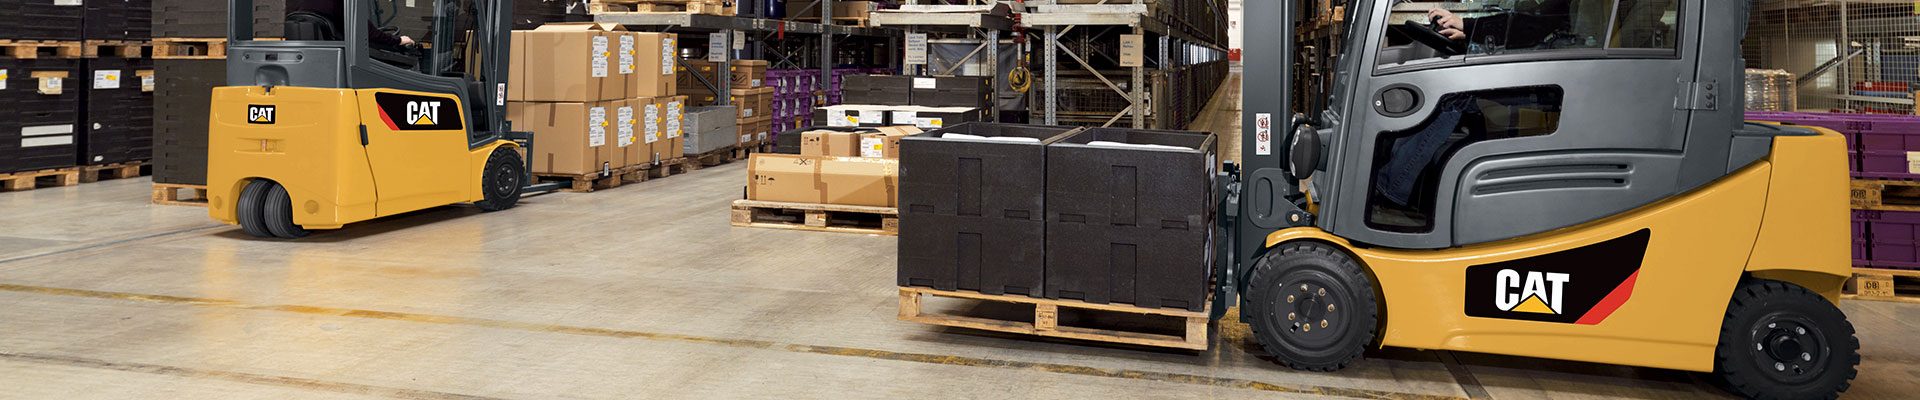 Parts for CAT electric forklifts working in a warehouse